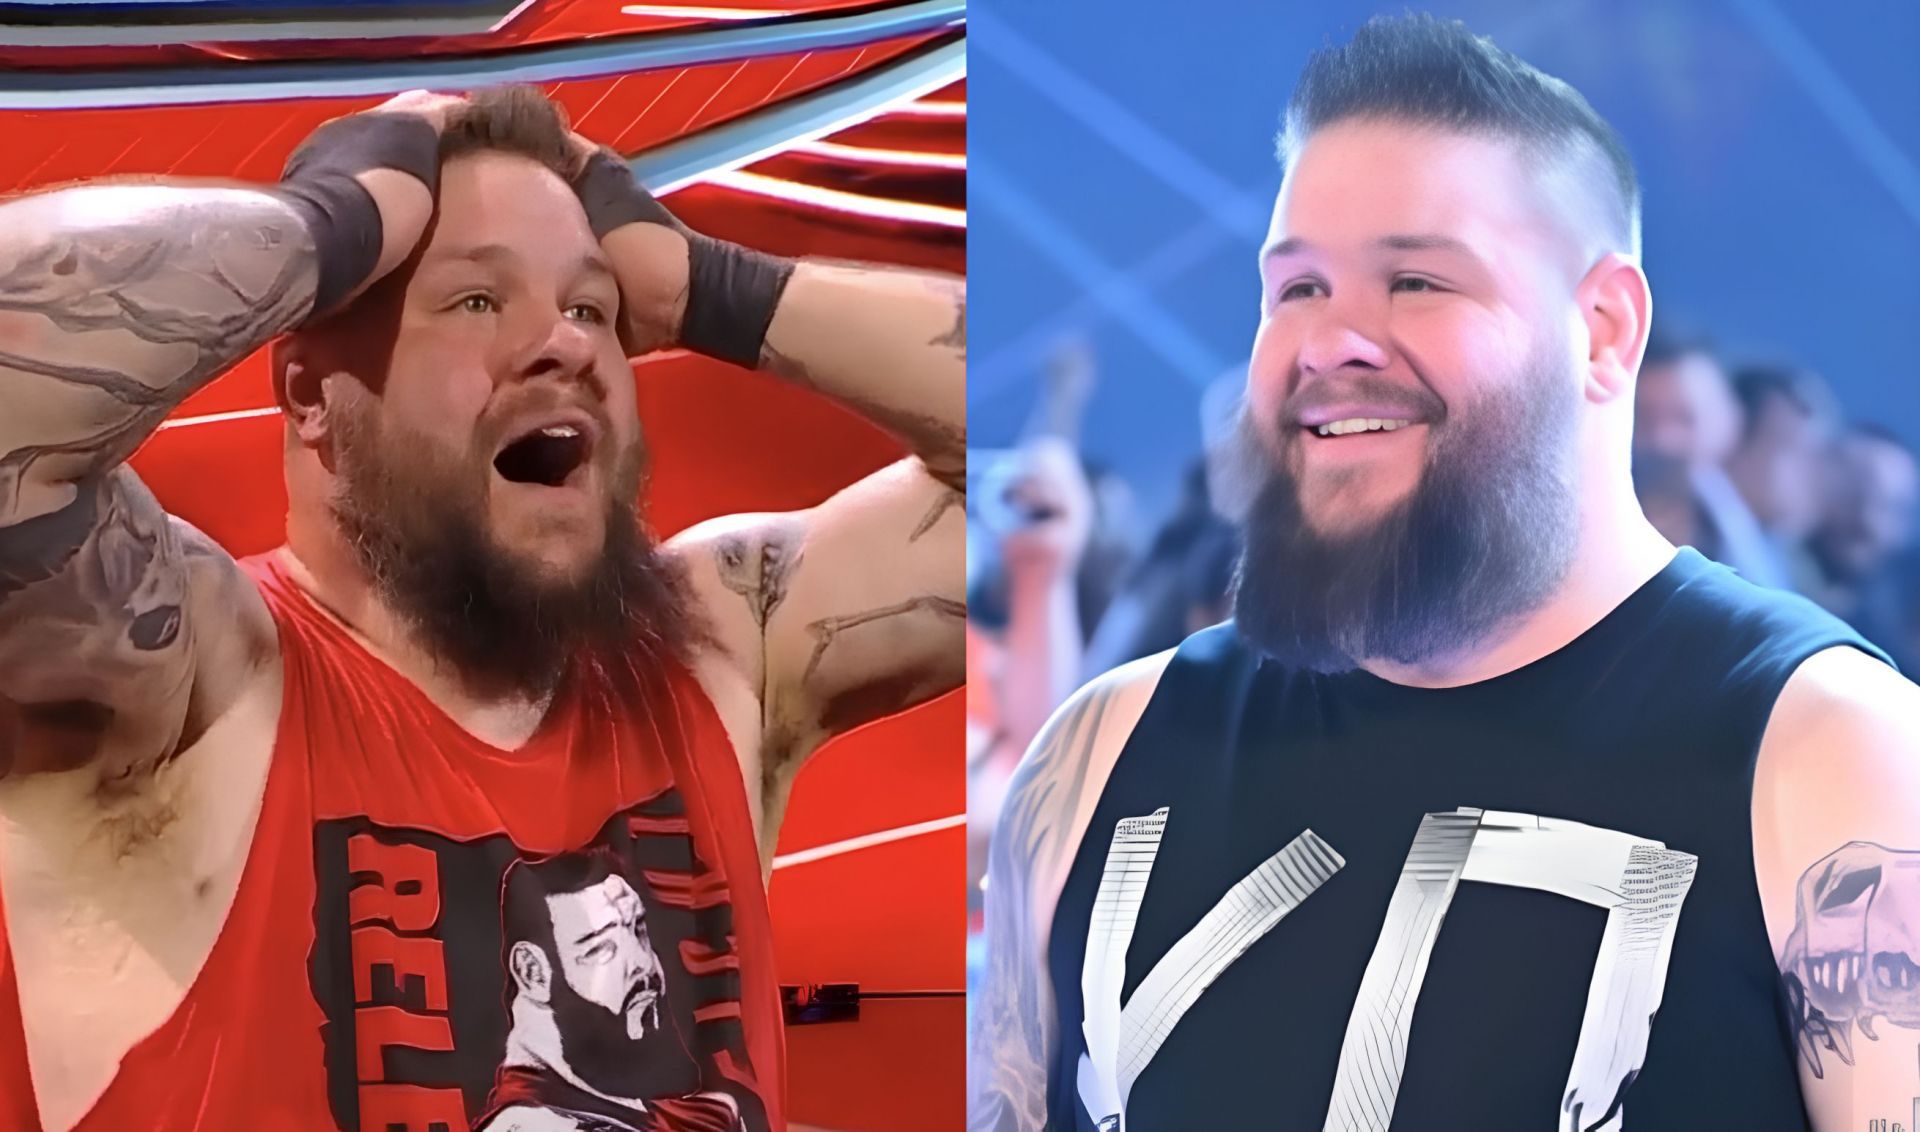 Kevin Owens is currently drafted on SmackDown